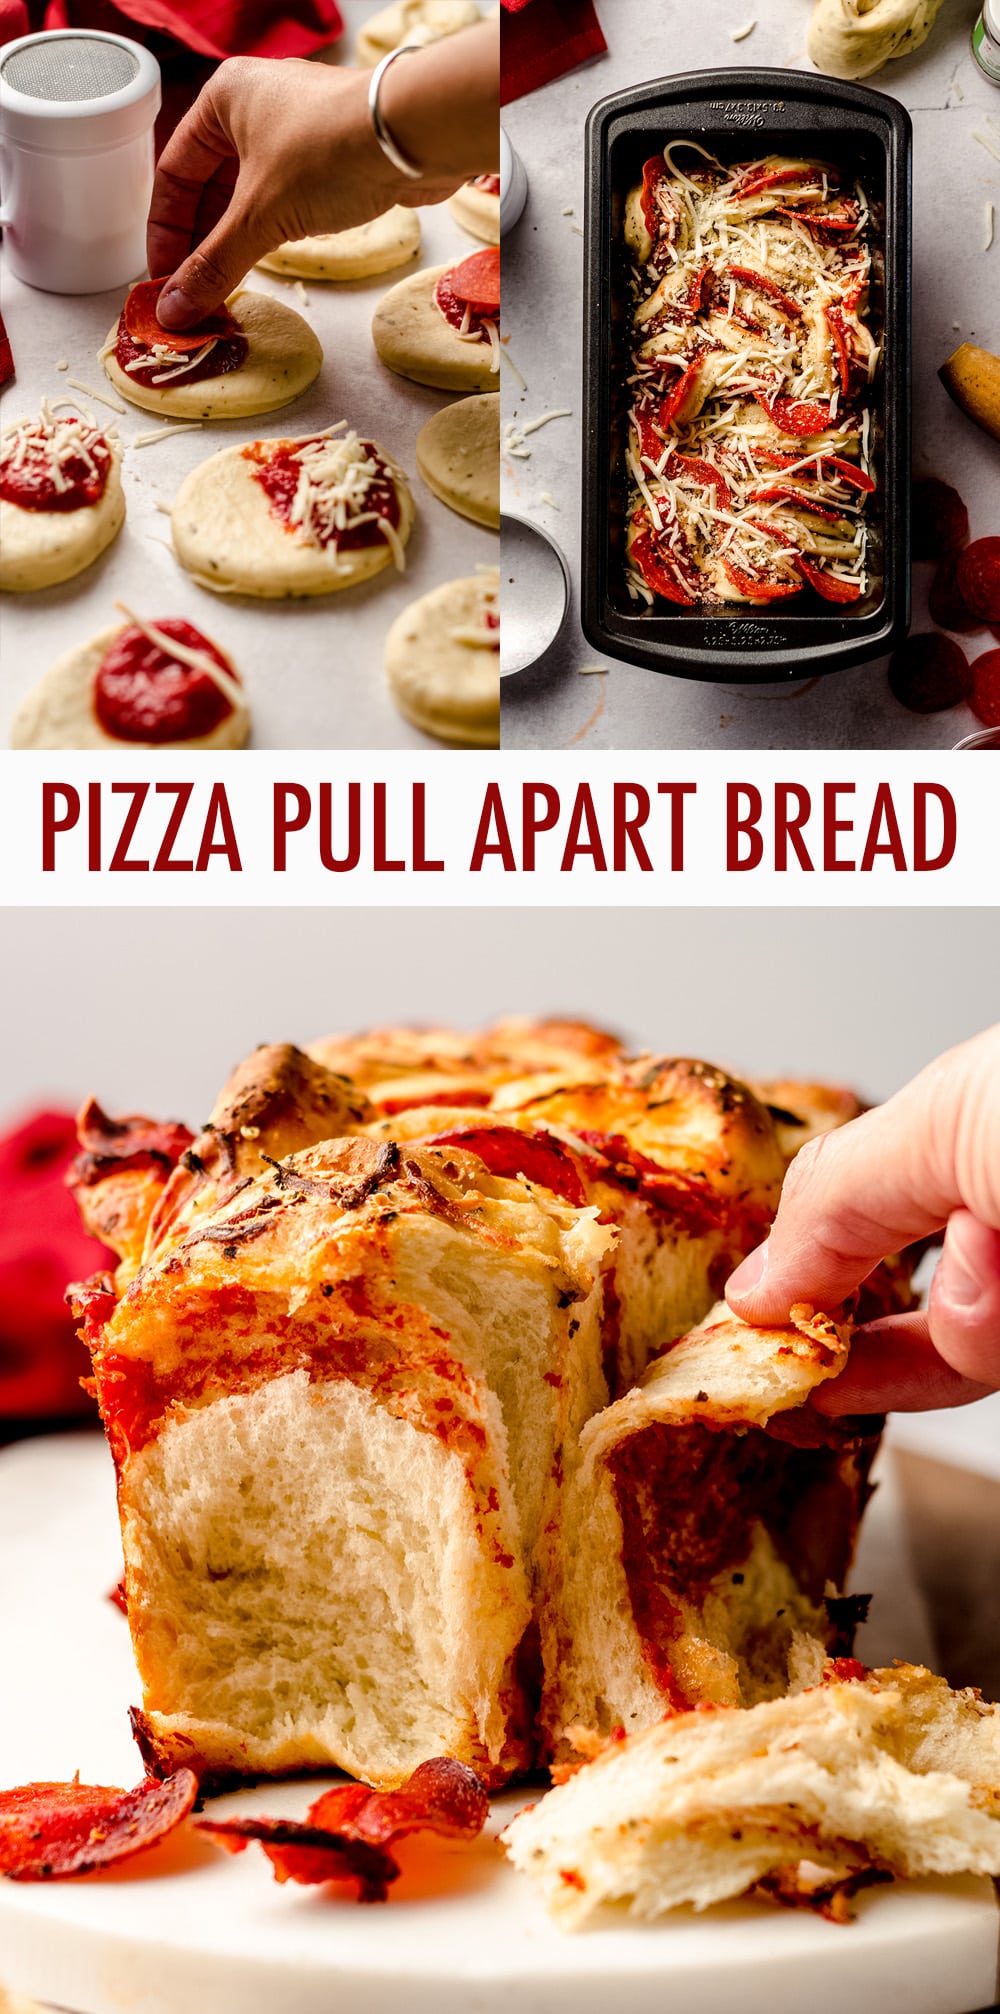 A simple loaf of yeast bread made with layers of pizza sauce, shredded cheese, and pepperoni. A fun twist on traditional pizza and easy to transport! via @frshaprilflours